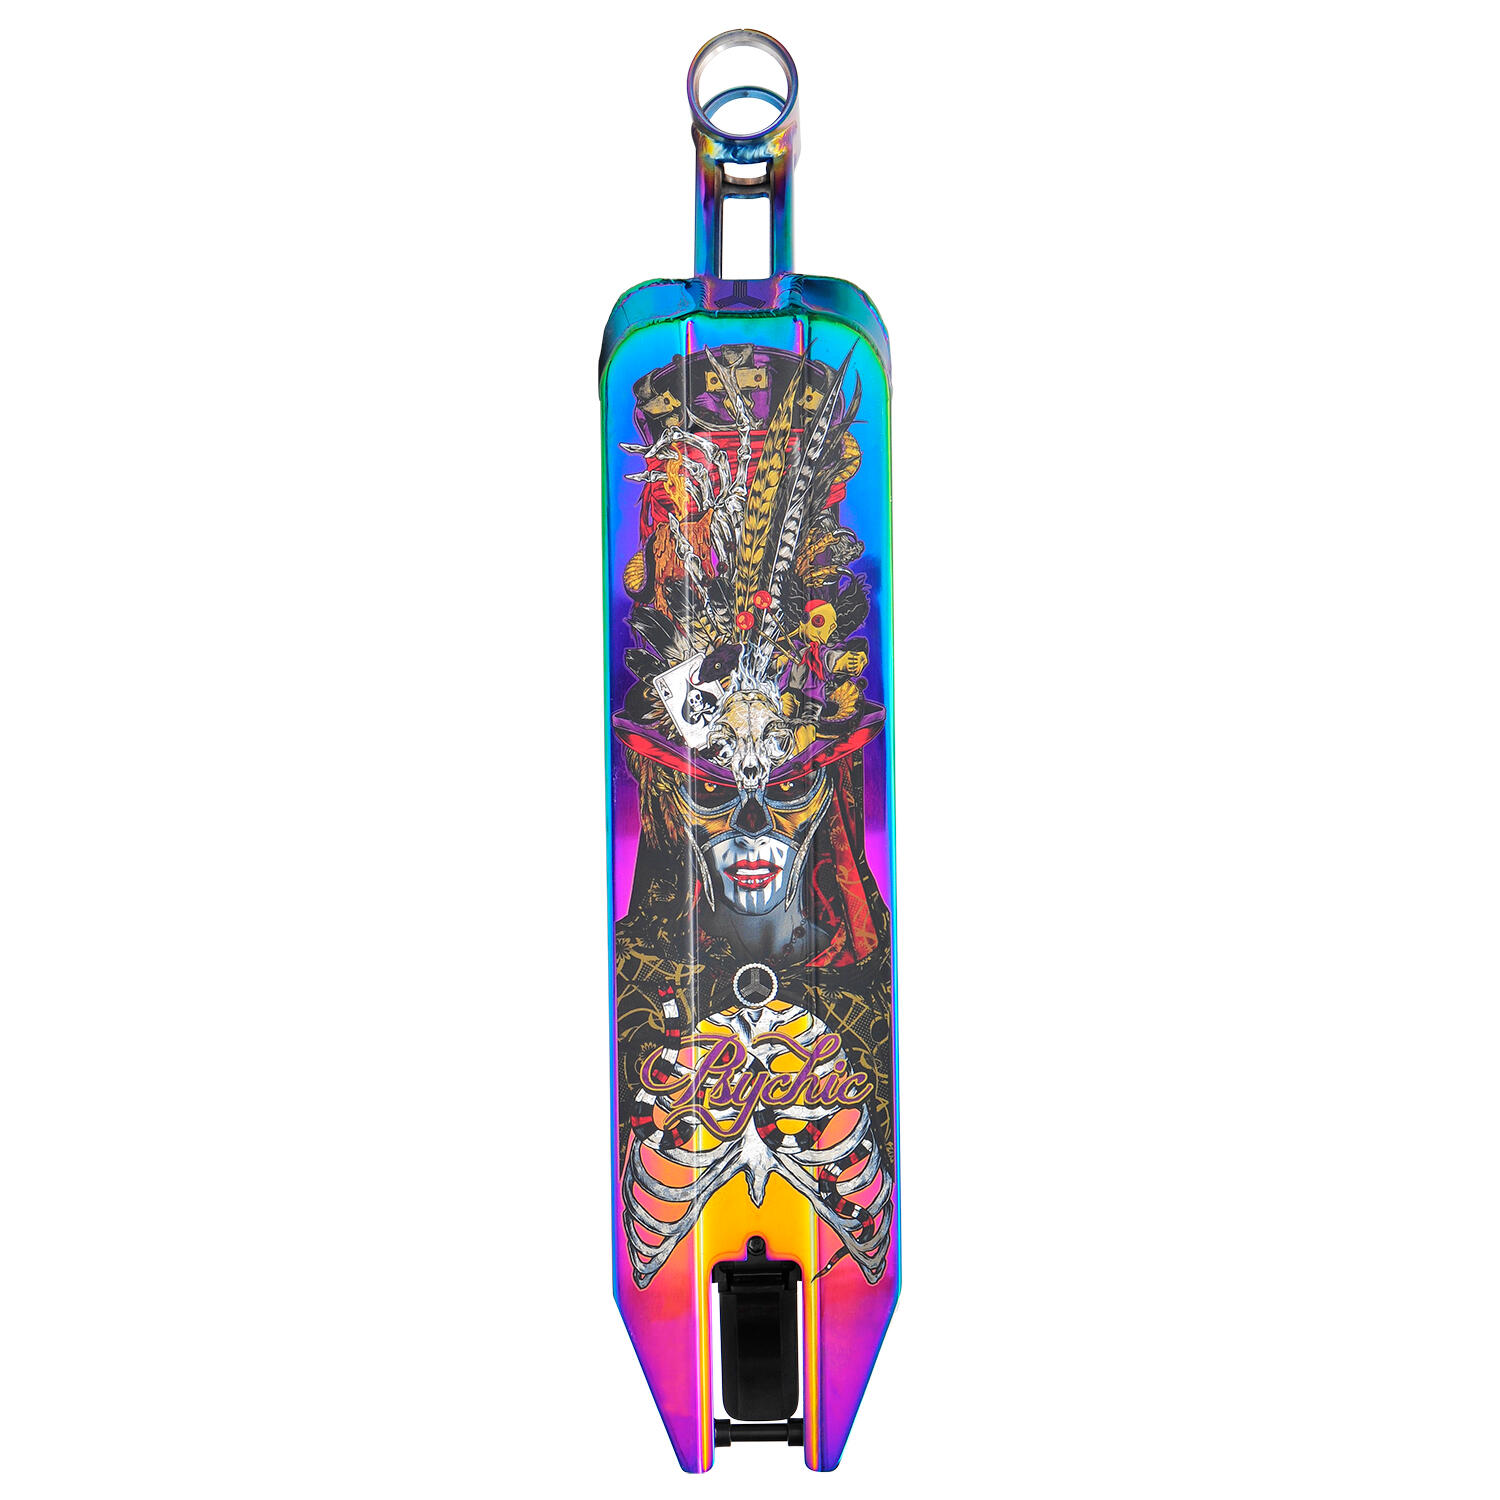 Psychic Deck 4.7" x 19.5" - Neo Chrome and Black 2/5